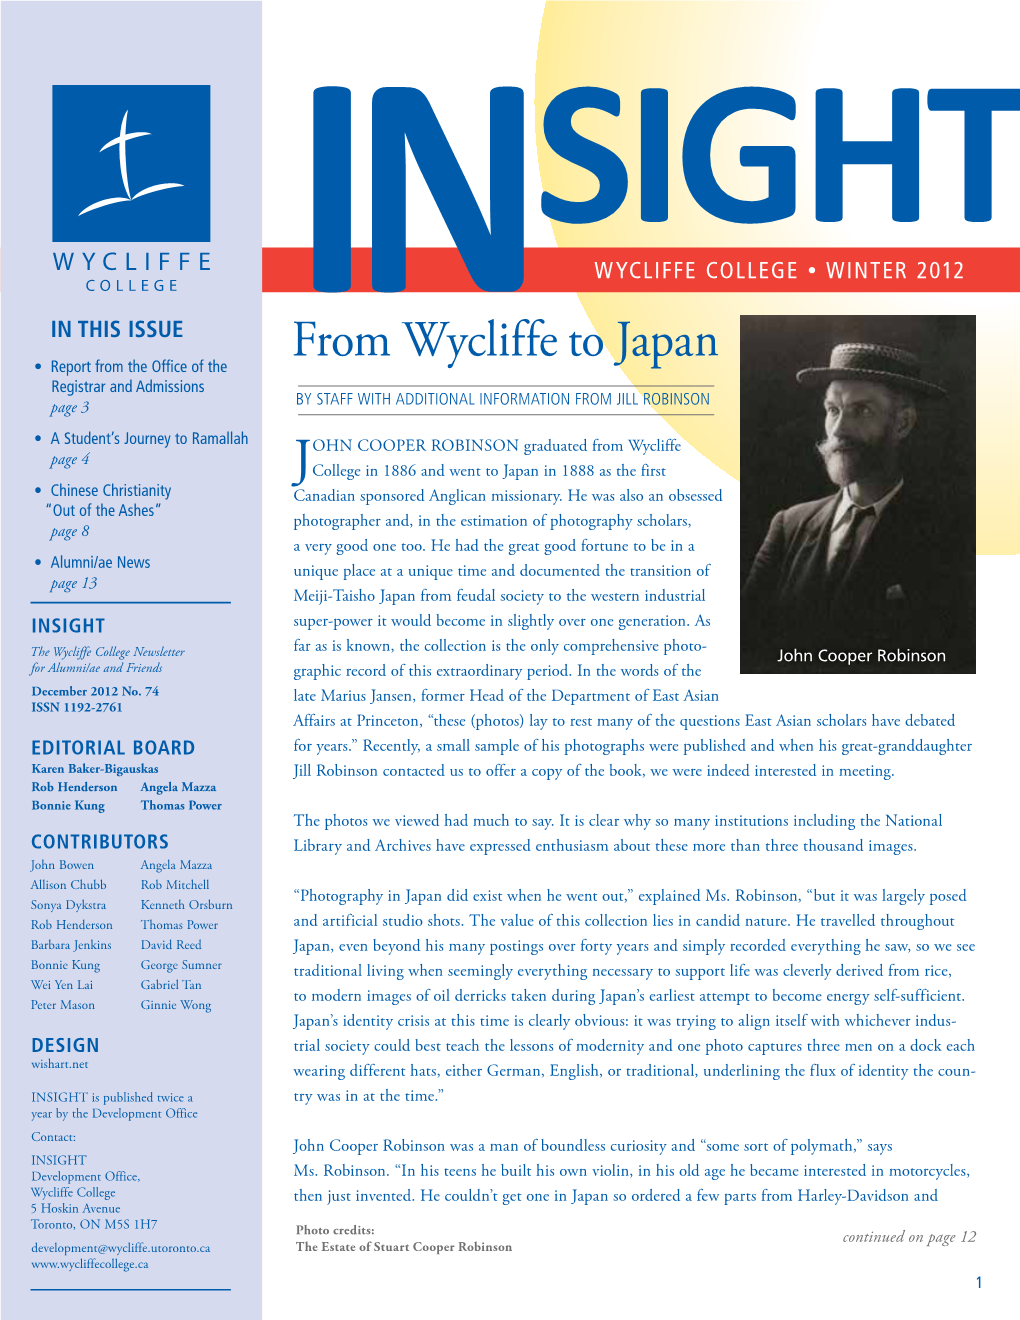 From Wycliffe to Japan